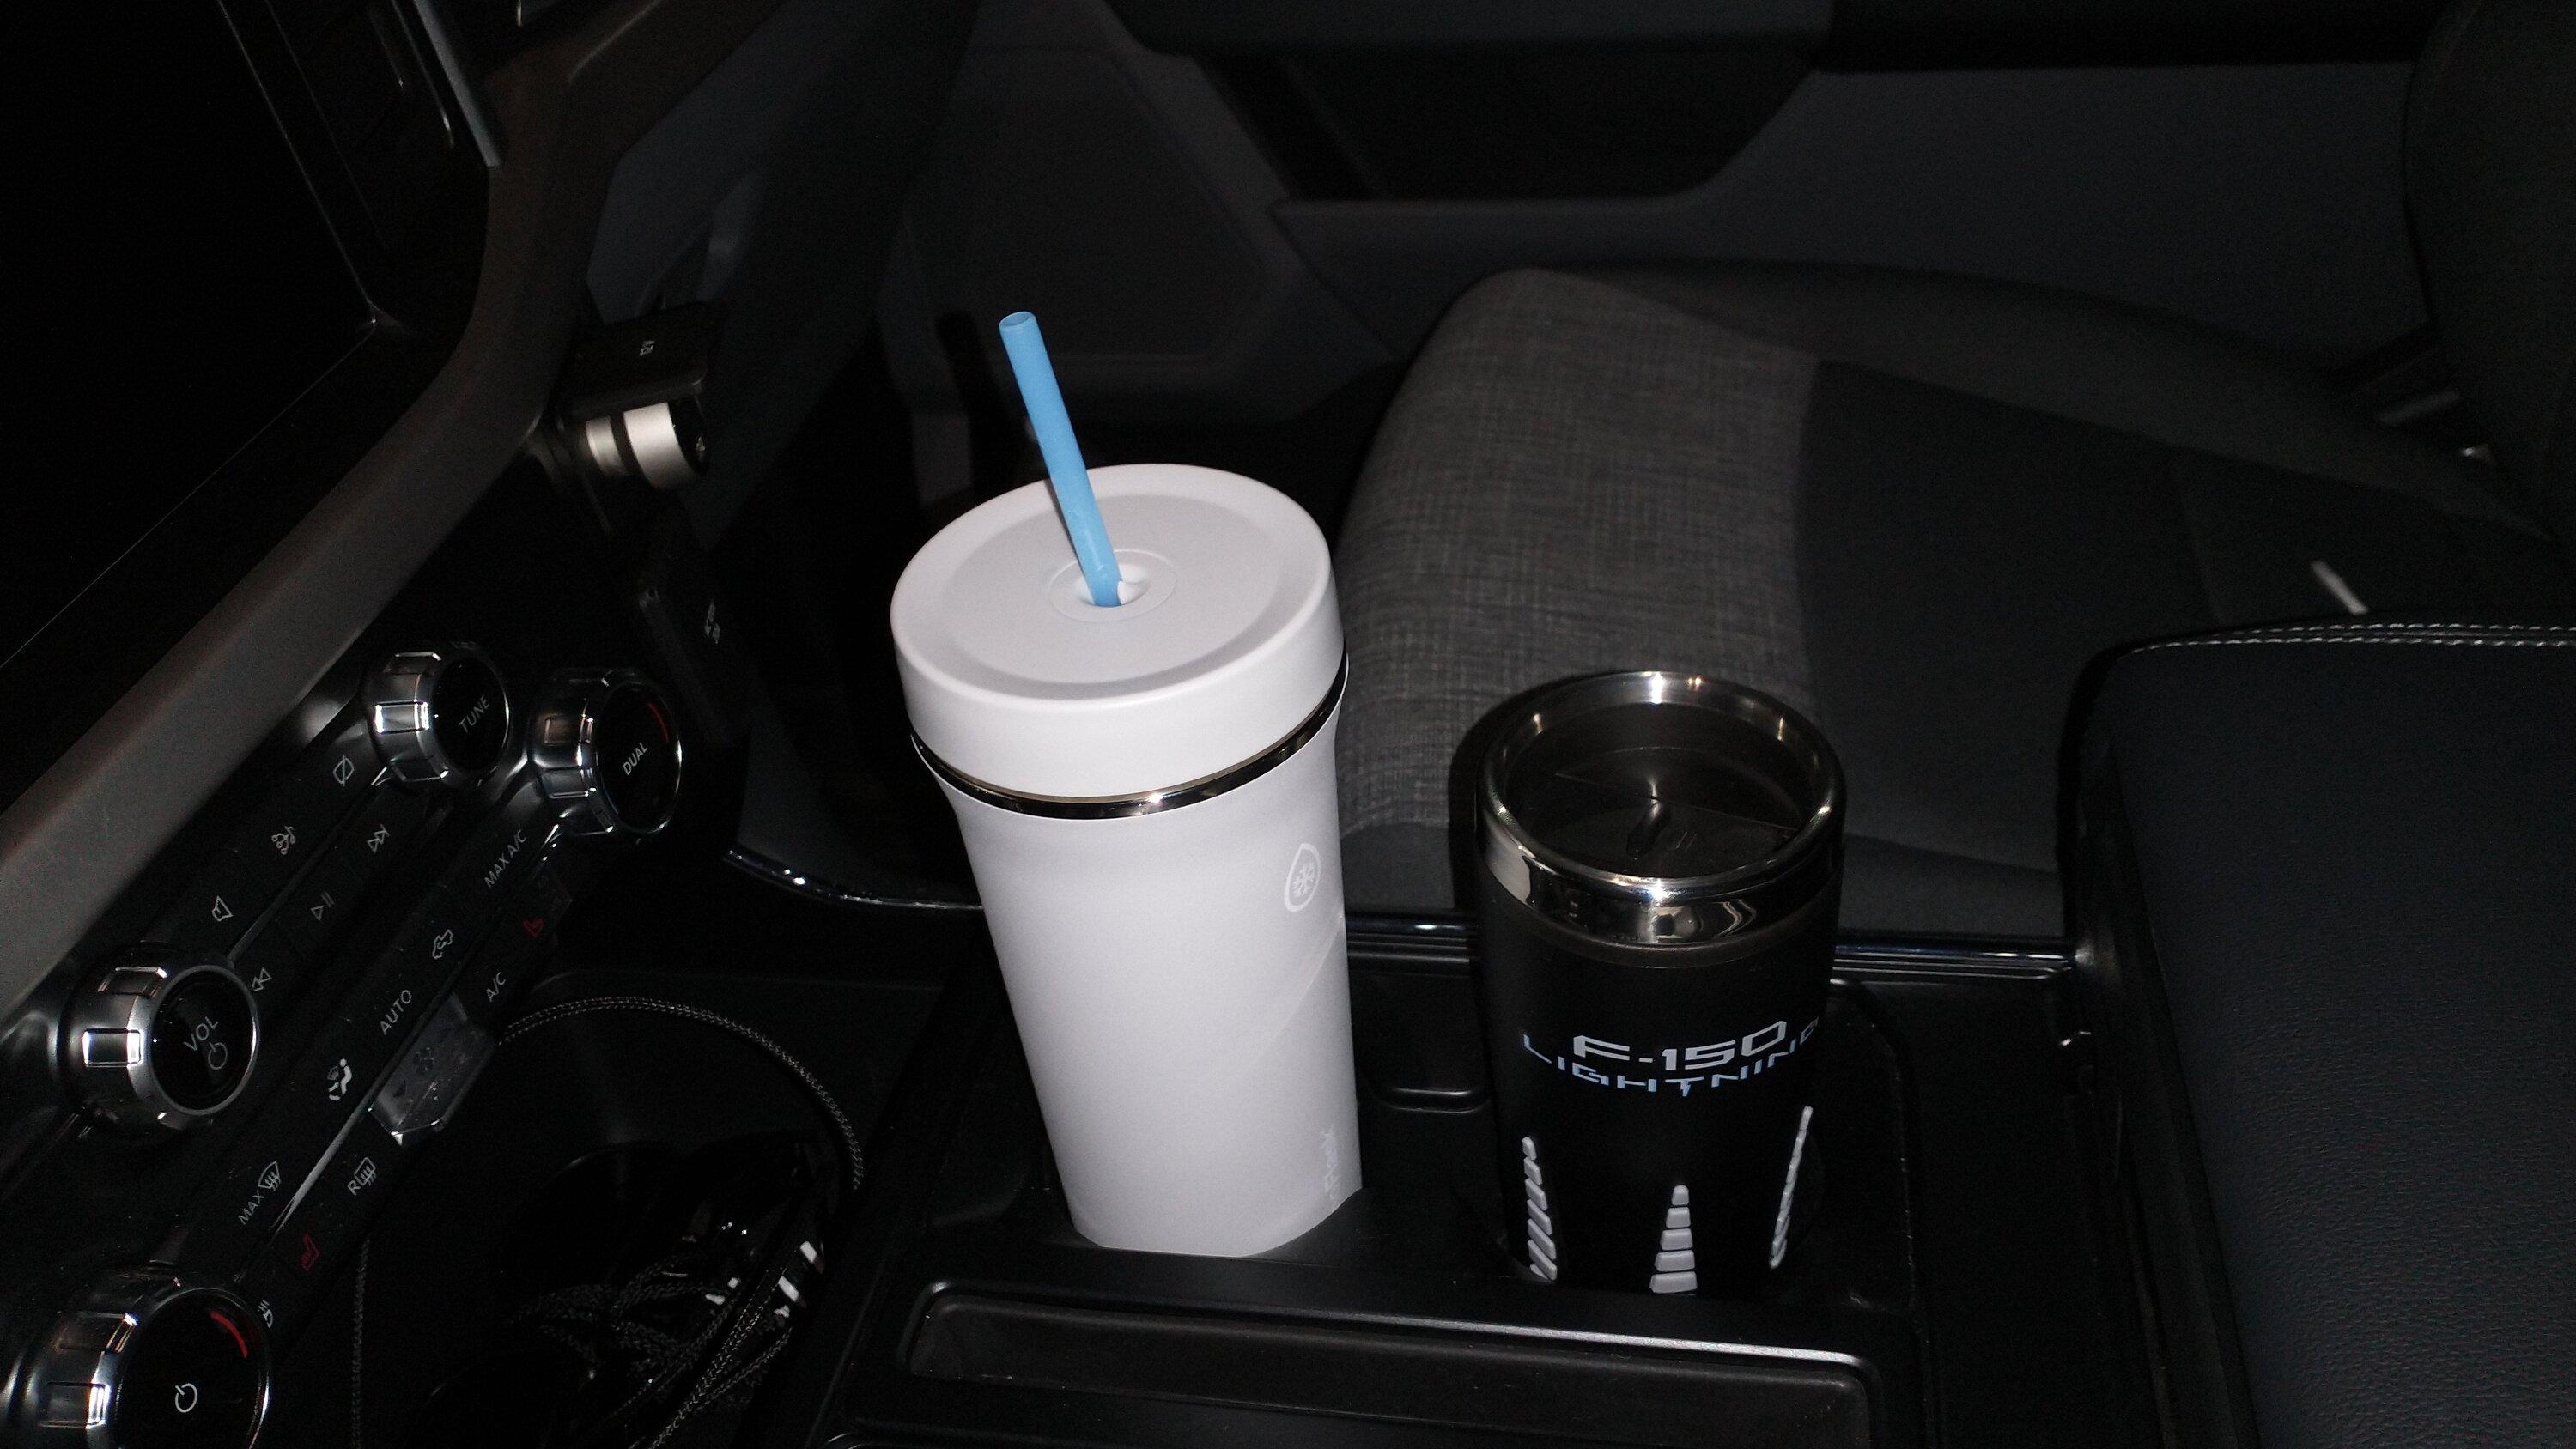 Ford F-150 Lightning Best drink cups, containers, flasks, tumblers for various drink & cupholders? IMG_20230105_214319941 Costco ThermoFlask vs Ford Lightning flask in cupholders